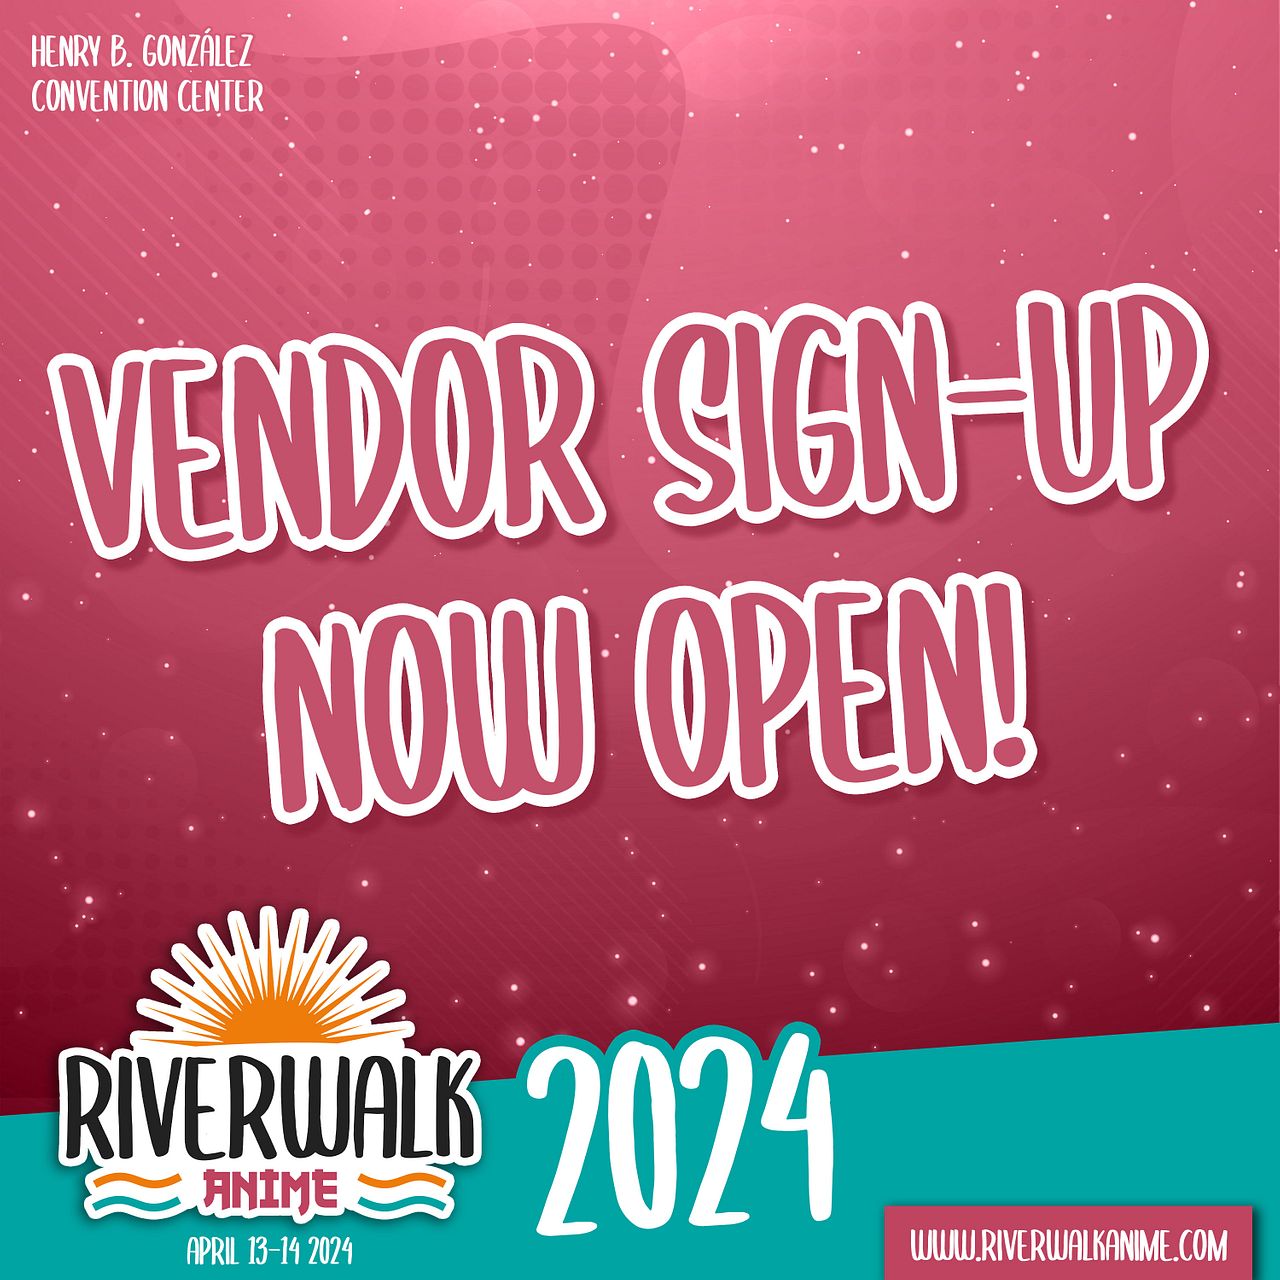 Riverwalk Anime 2024 Exhibitors and Artist Booths Tickets at Henry B